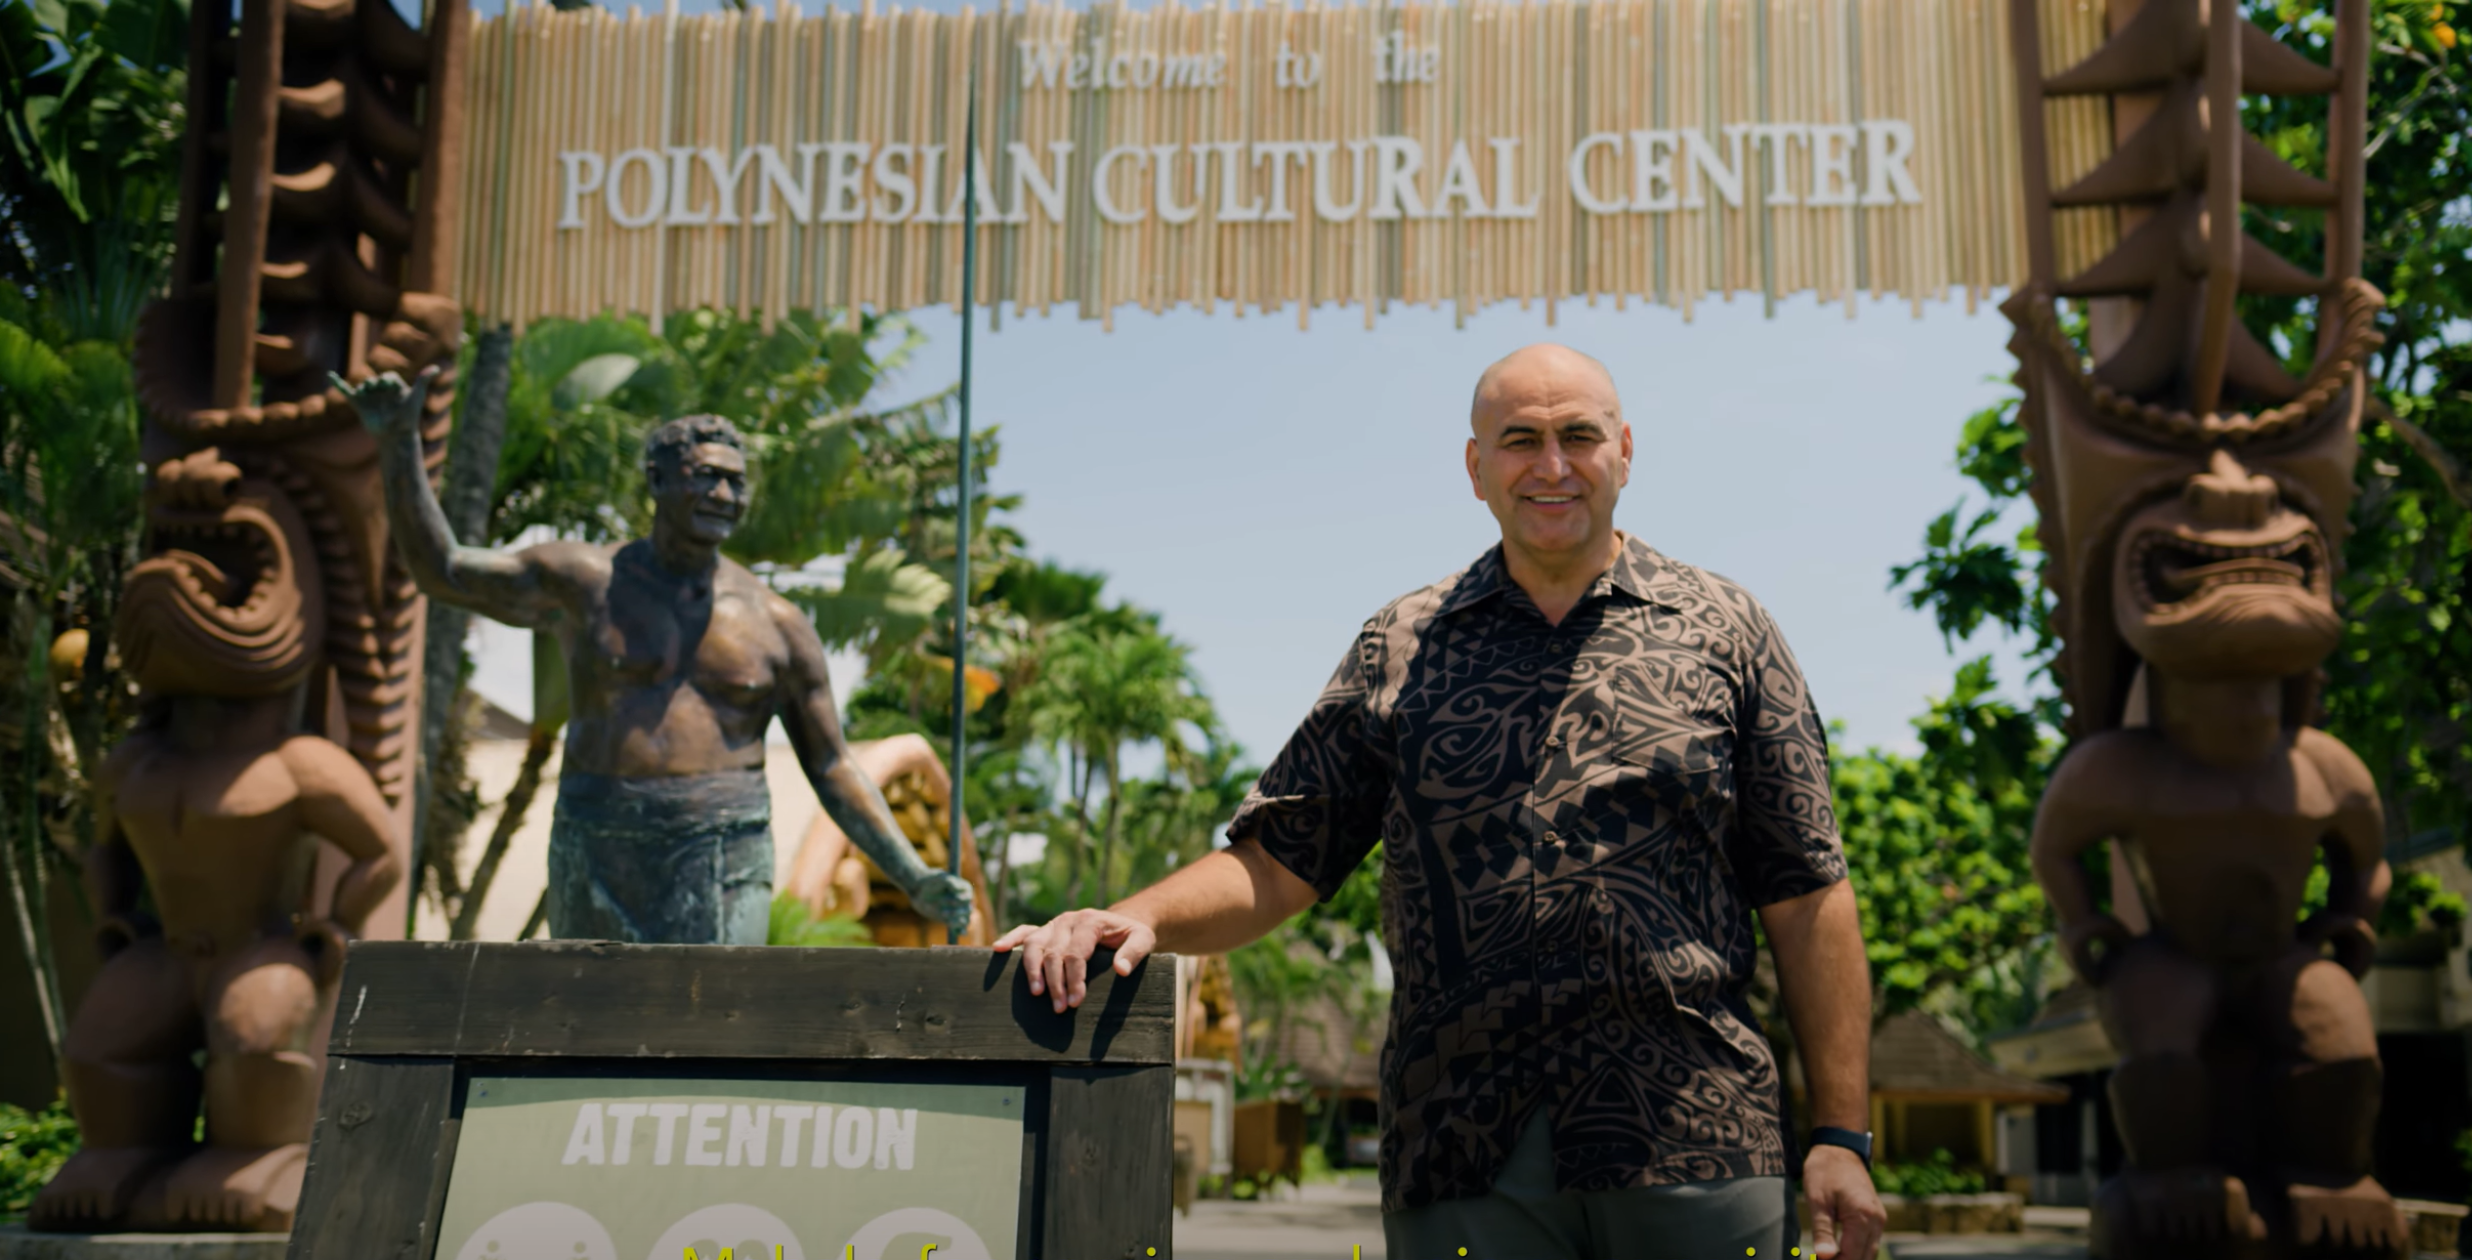 P. Alfred Grace, President of the Polynesian Cultural Center greets visitors in a Covid-19 specific Health & Safety video. The Center plans to fully reopen in March, 2021